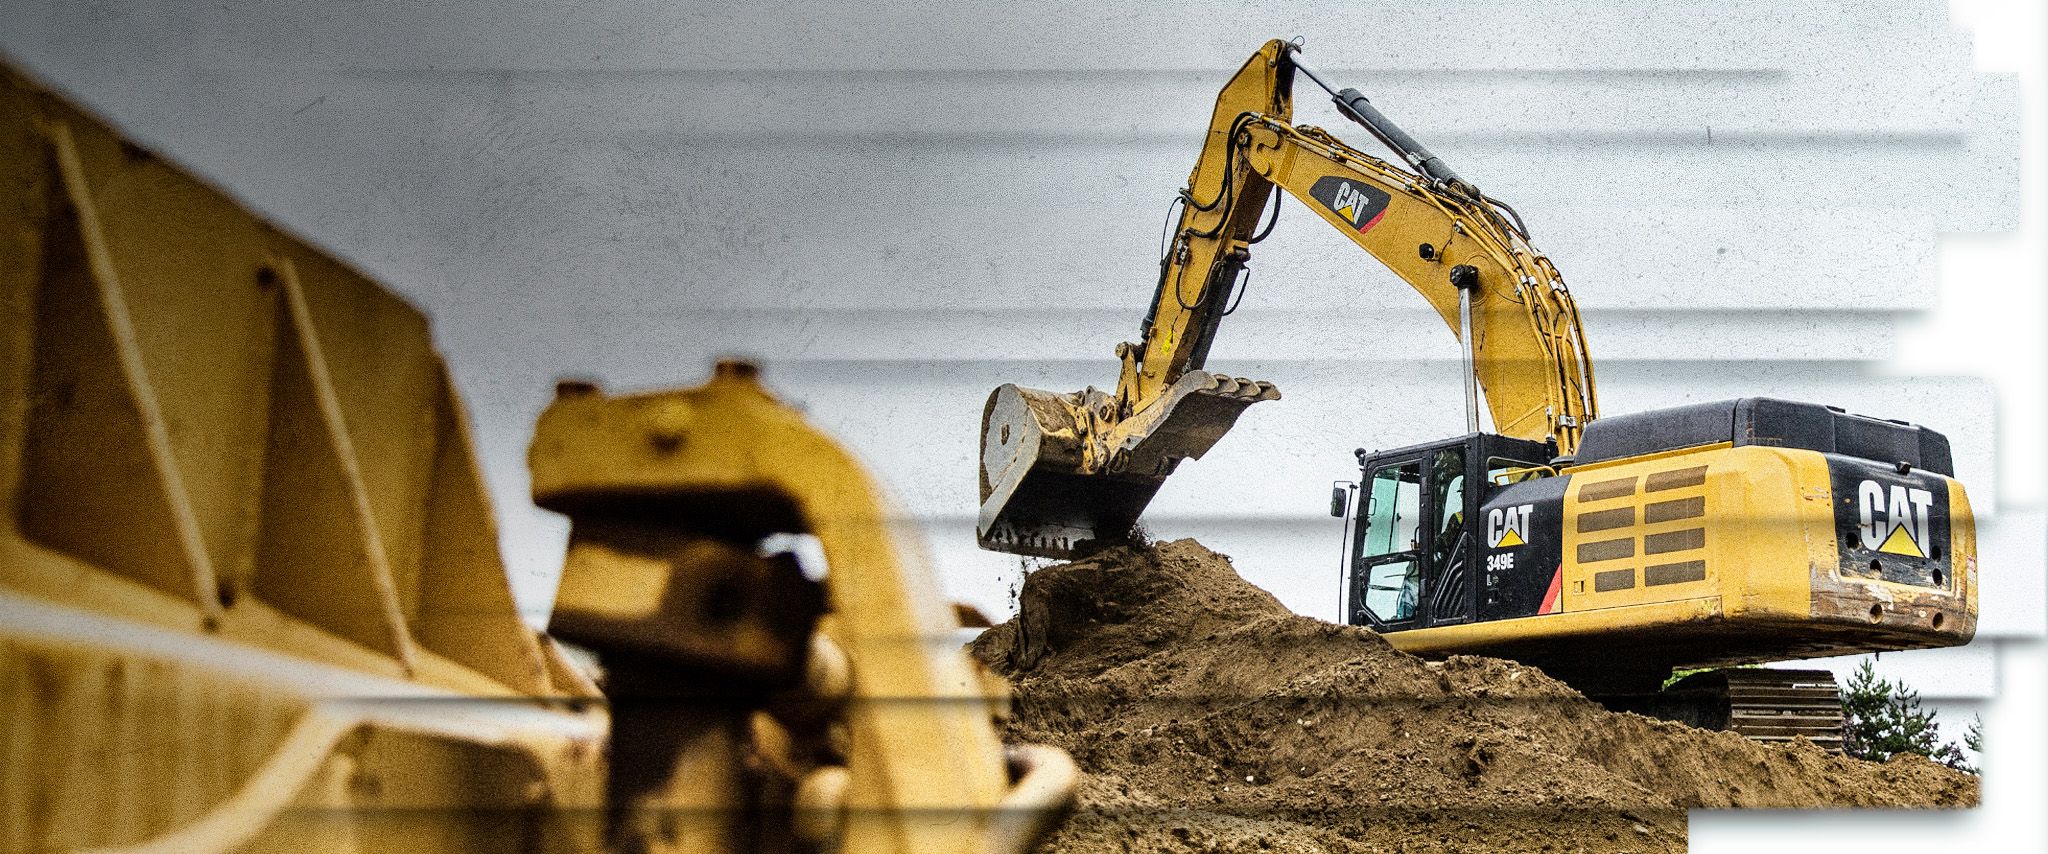 4 Tips for Buying Used Heavy Equipment Online